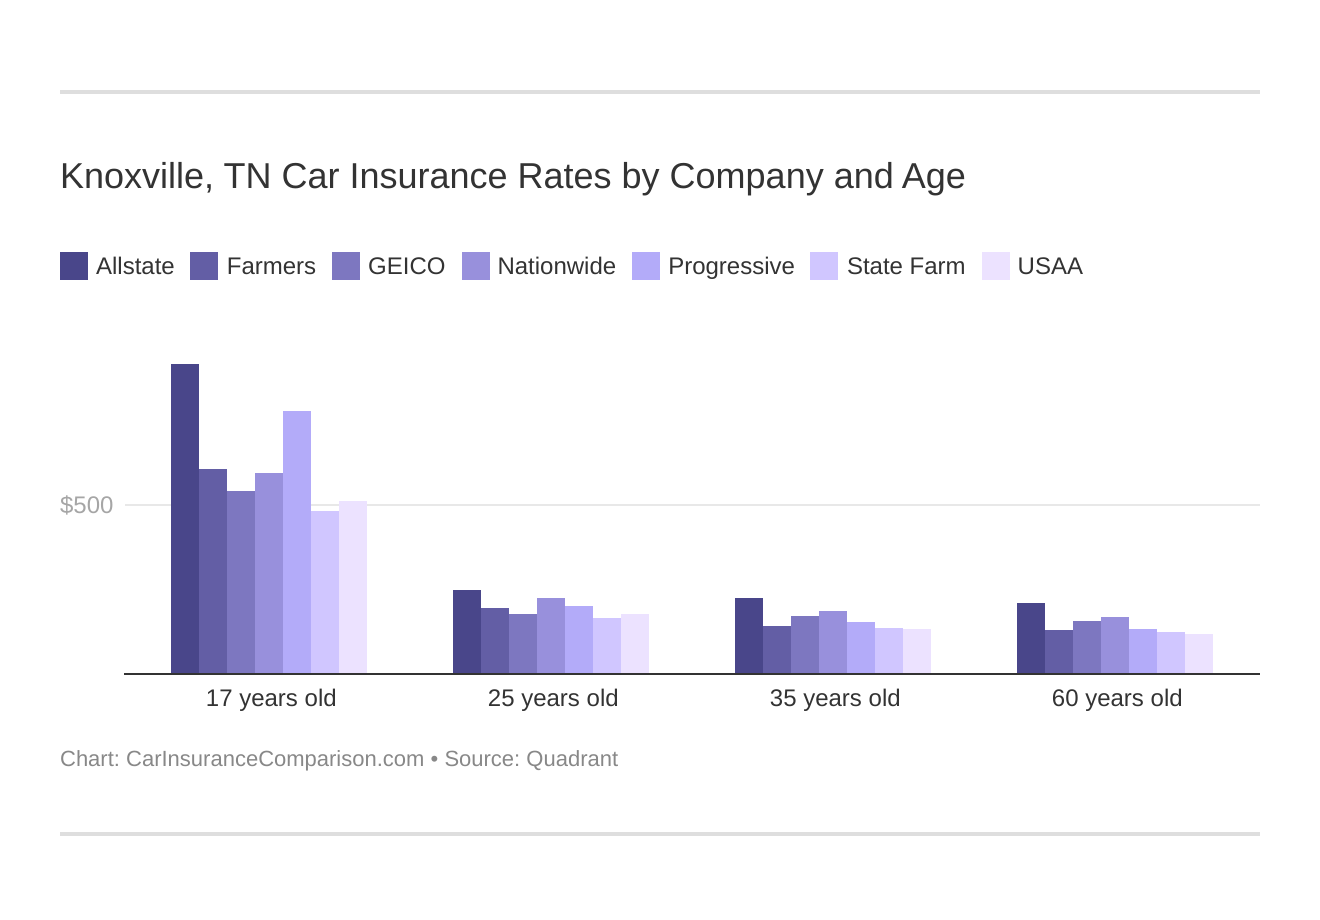 Knoxville, TN Car Insurance Rates by Company and Age